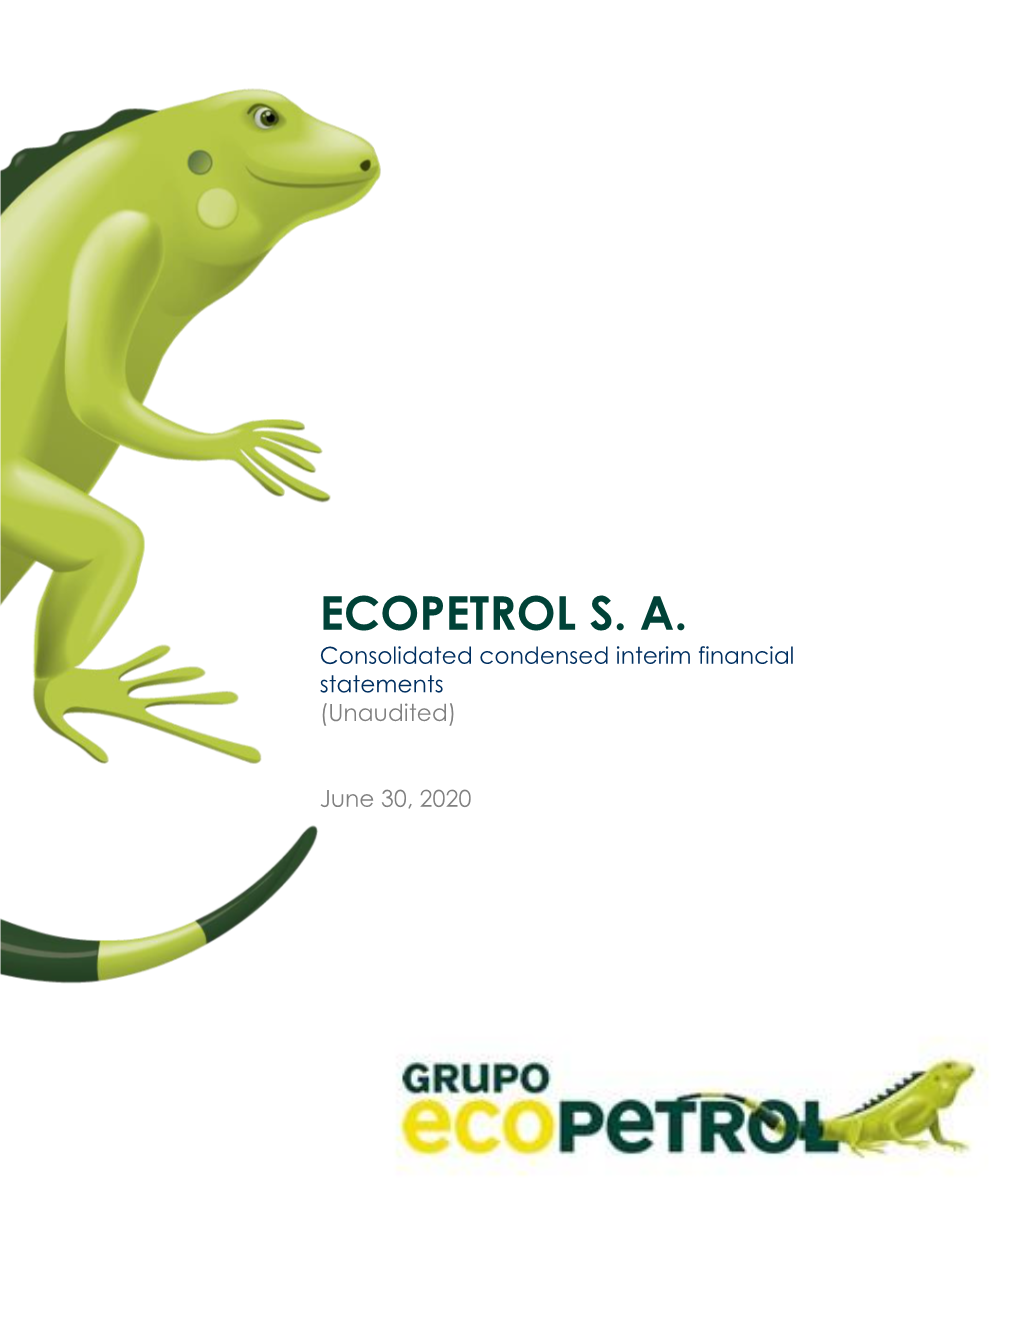 ECOPETROL S. A. Consolidated Condensed Interim Financial Statements (Unaudited)